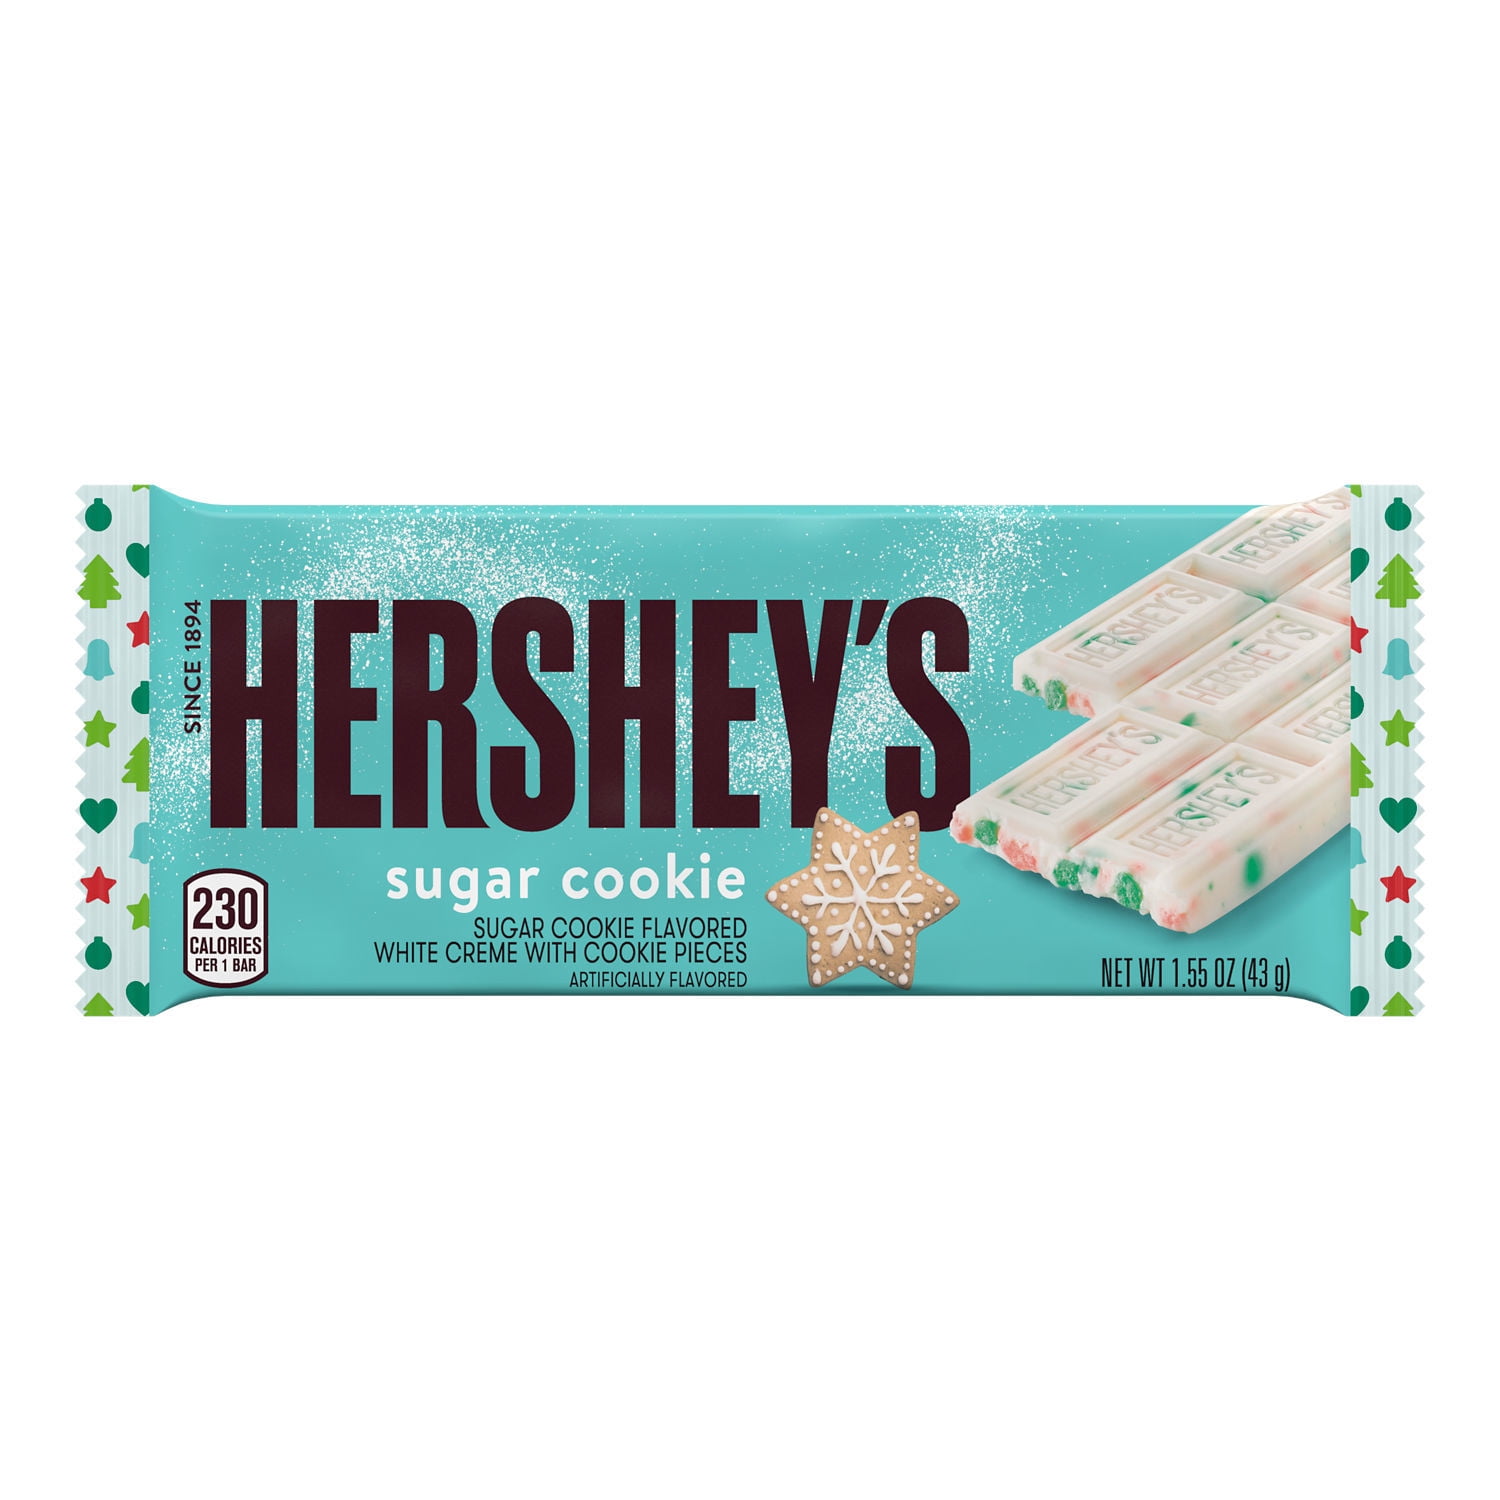 HERSHEY'S HERSHEY-ETS Candy Coated Milk Chocolate Christmas Candy